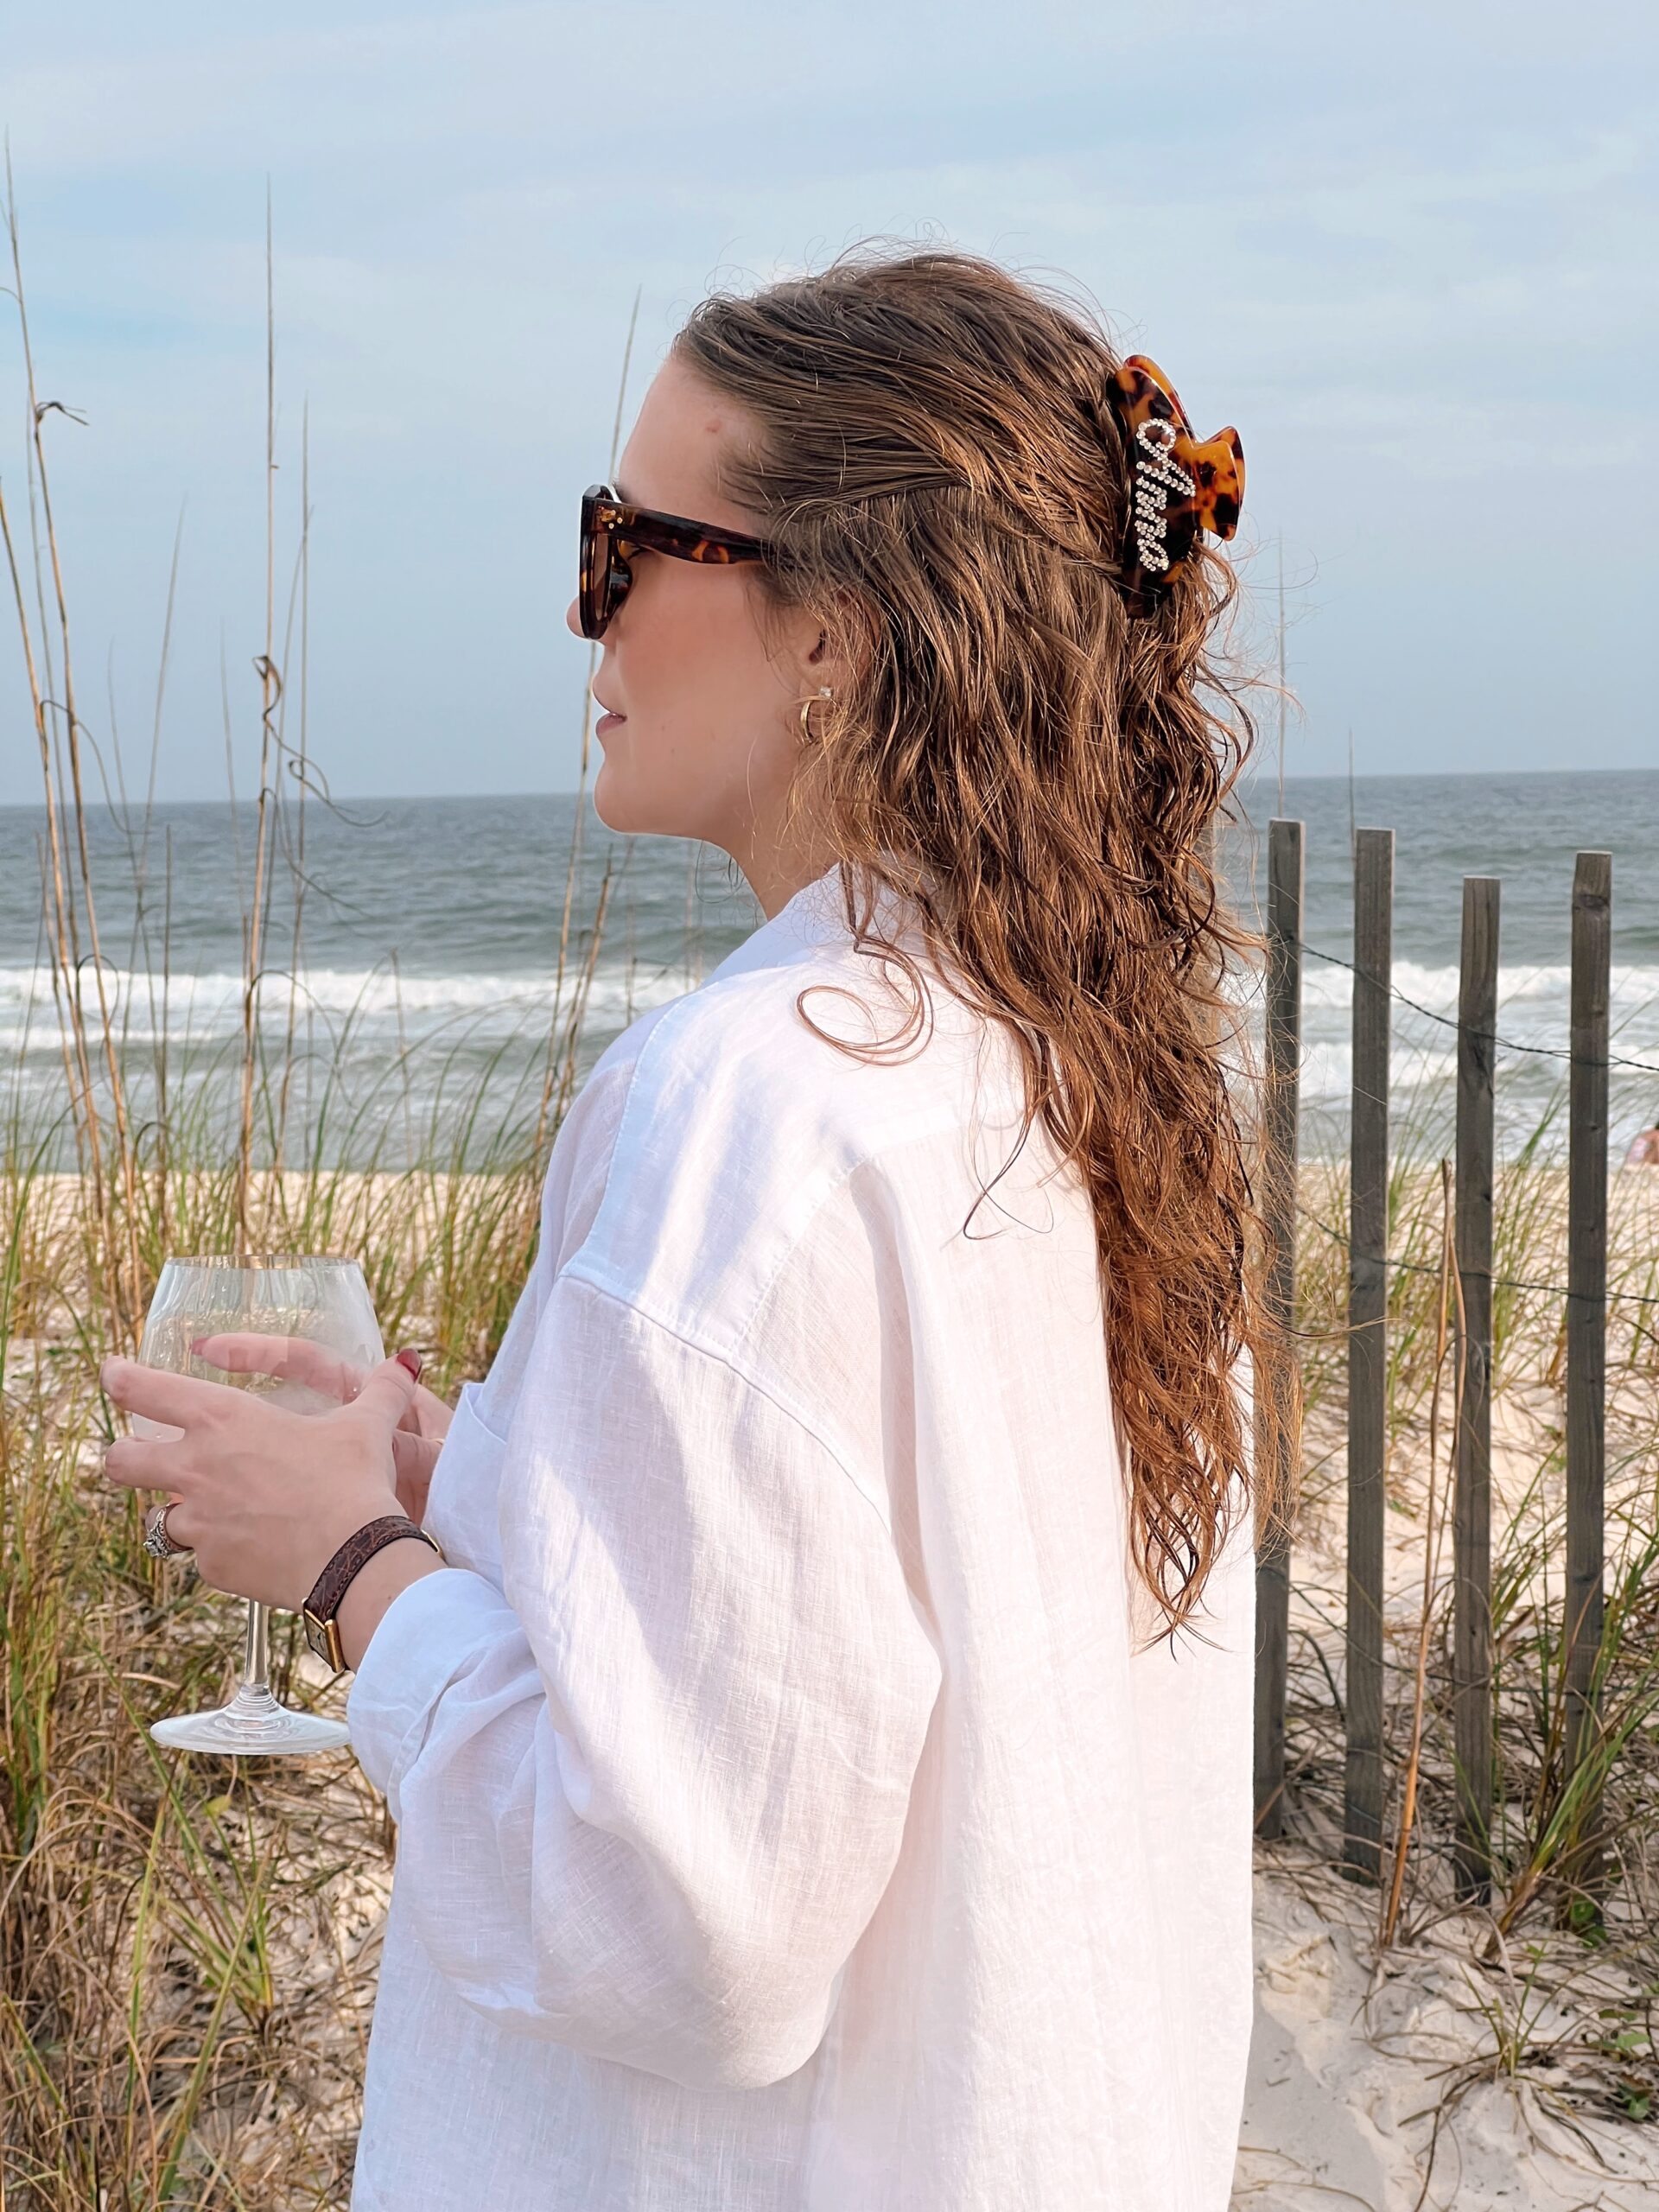 Anna standing on the beach with a glass of wine and sunglasses on.